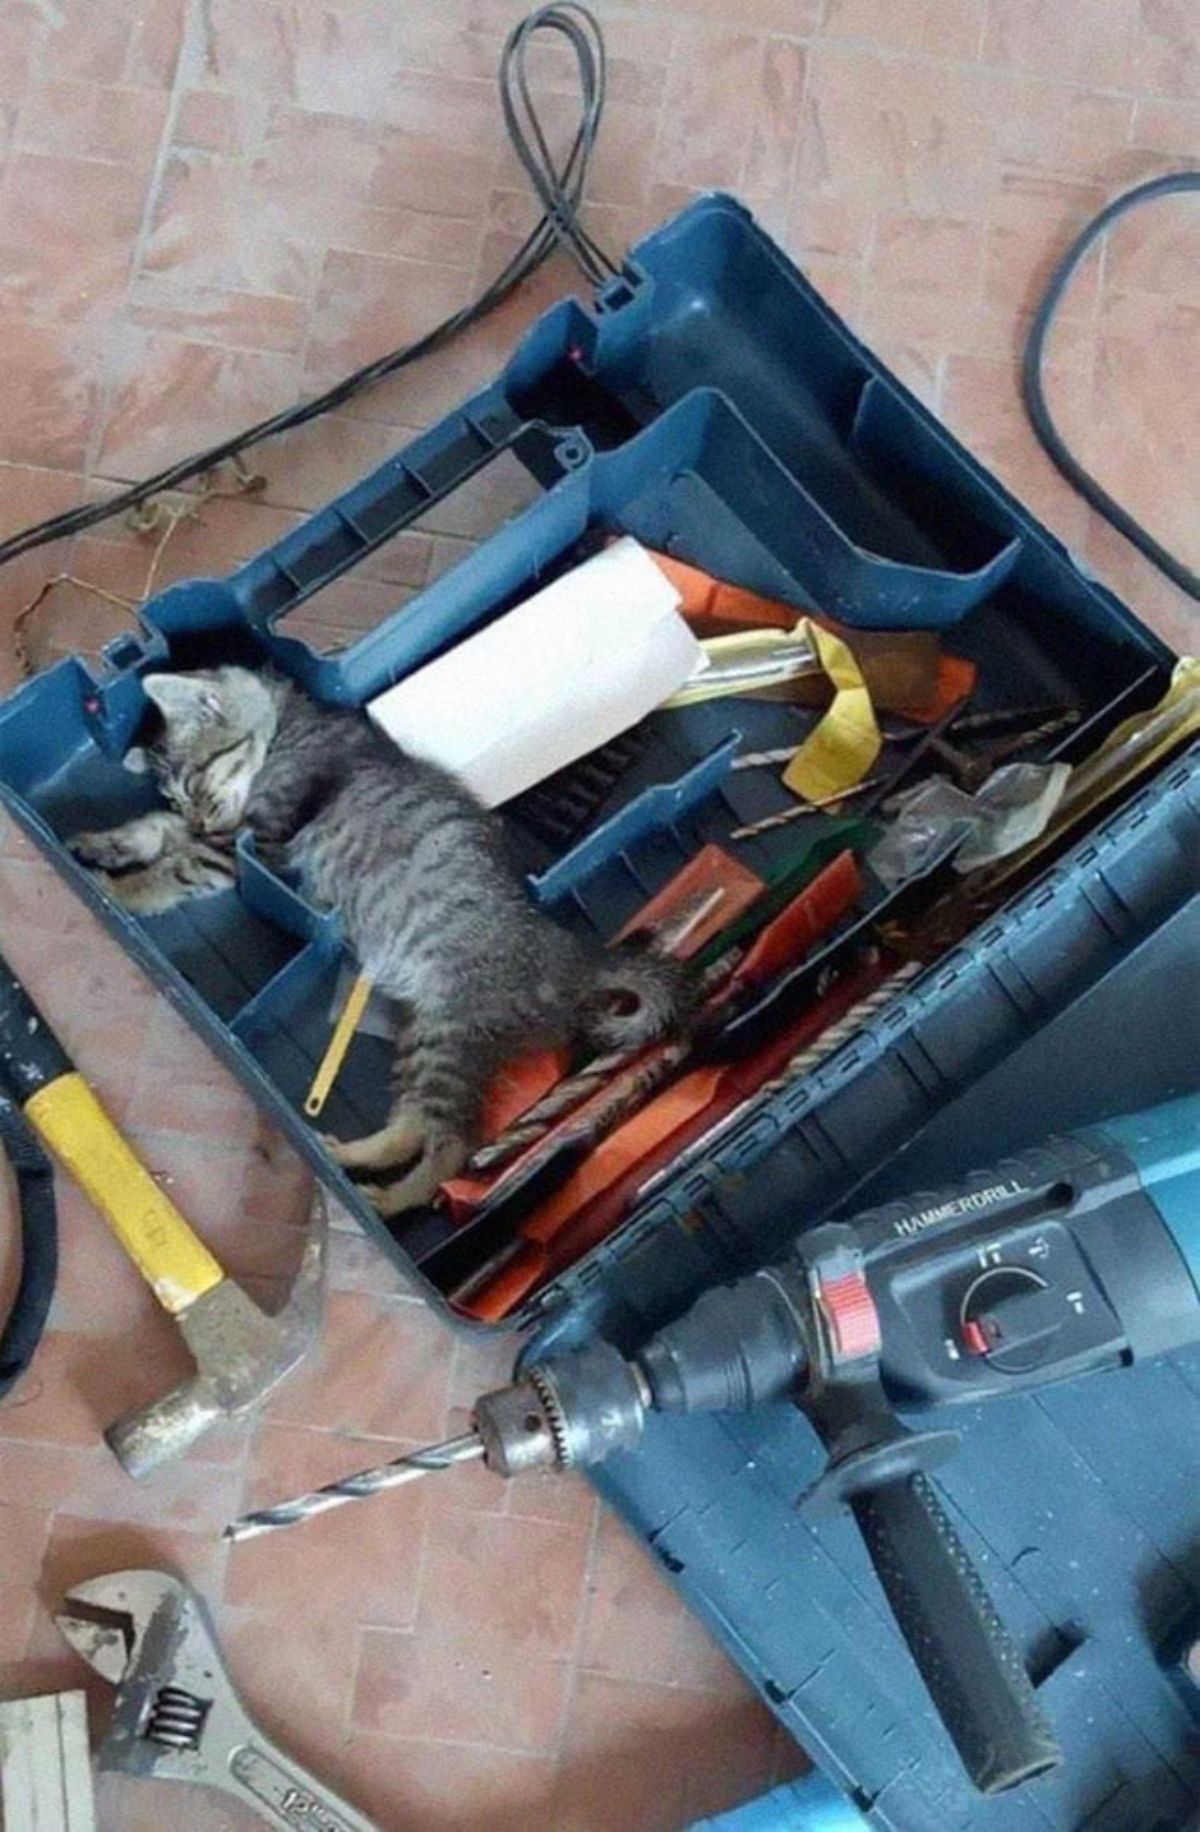 grey tabby kitten sleeping in a blue plastic toolbox filled with tools